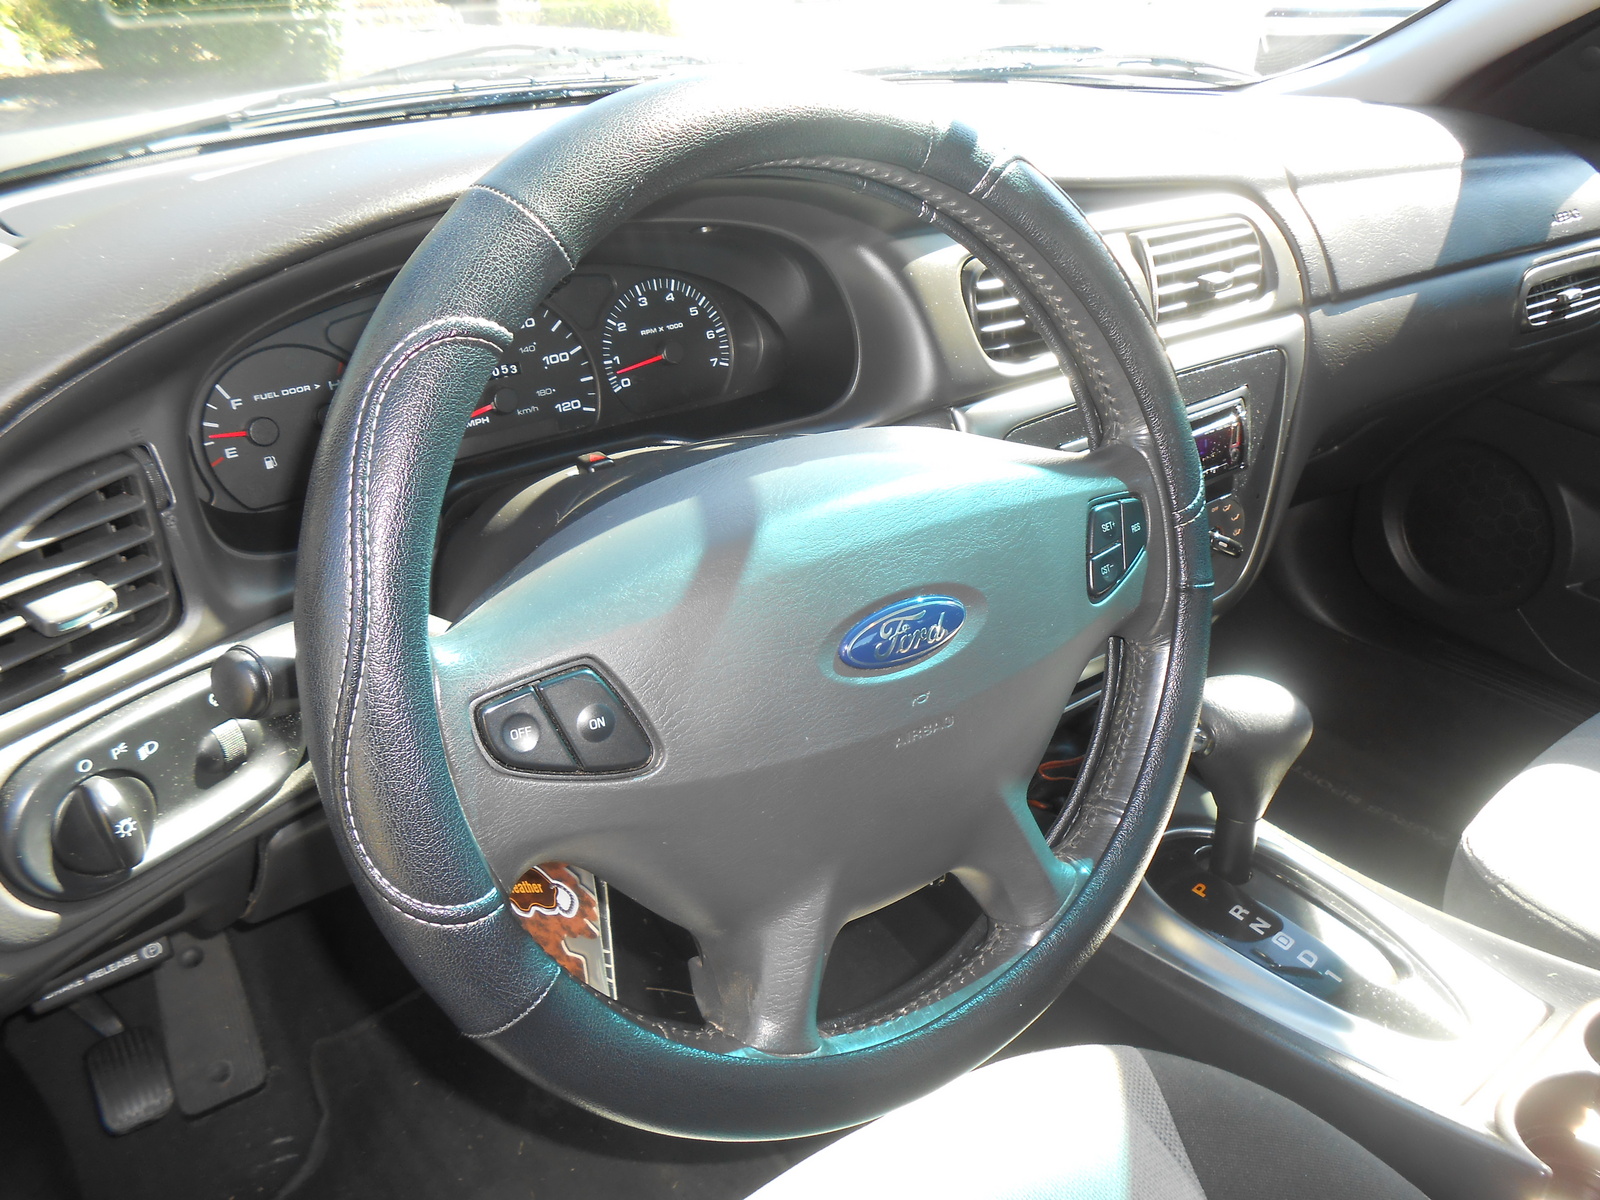 Consumer report on 2003 ford taurus #8